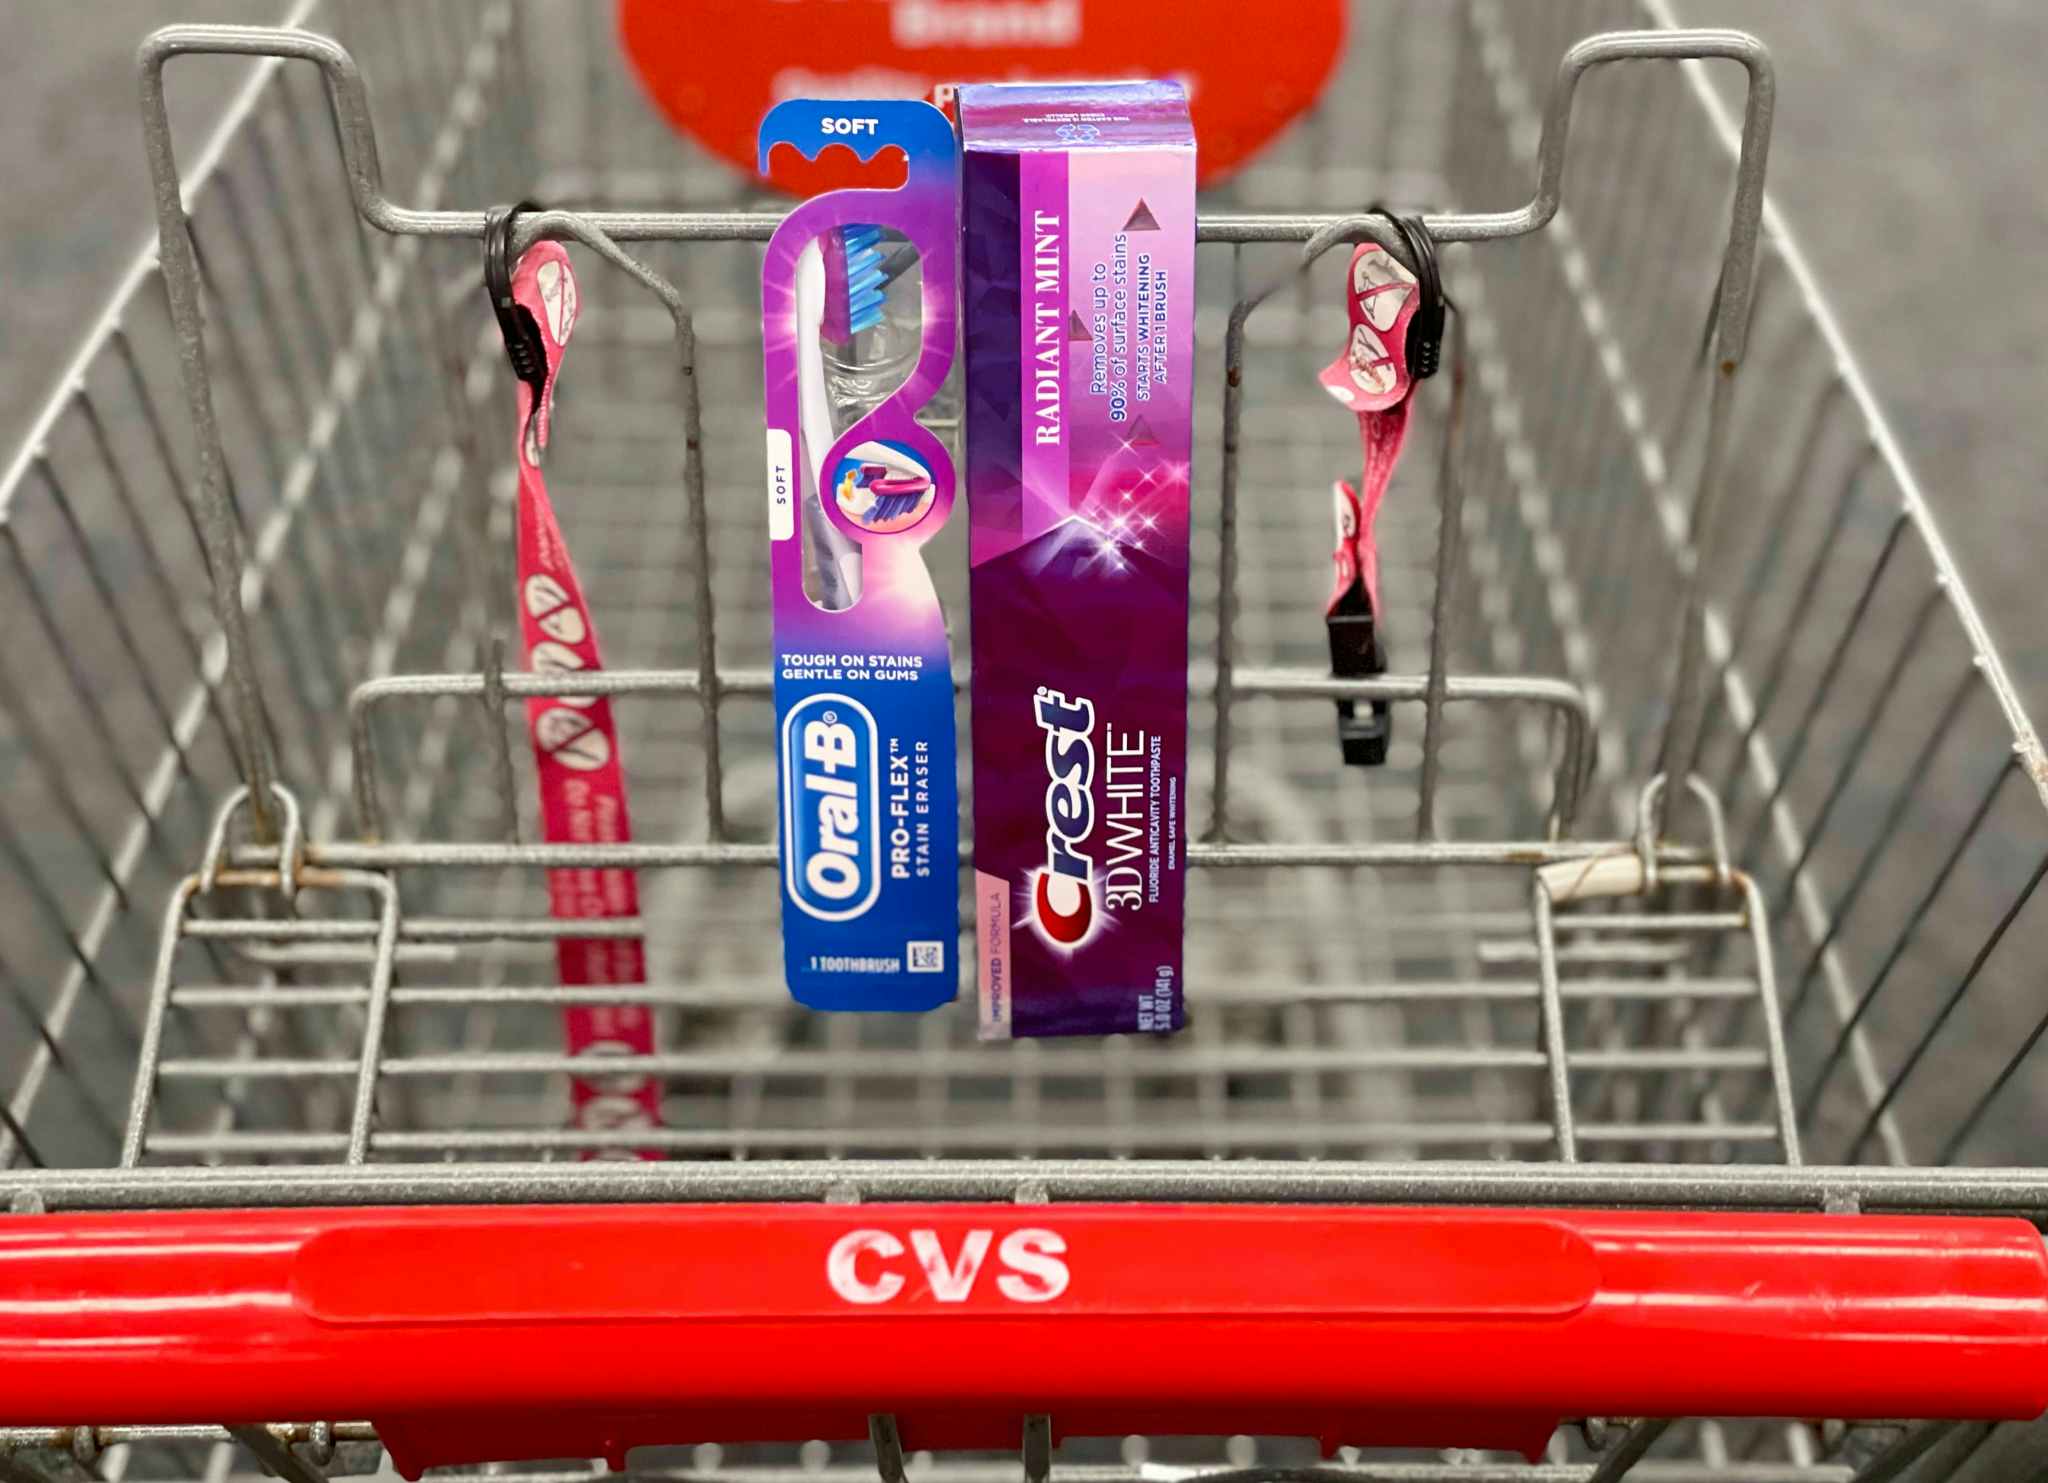 crest and oral-b in a cvs cart